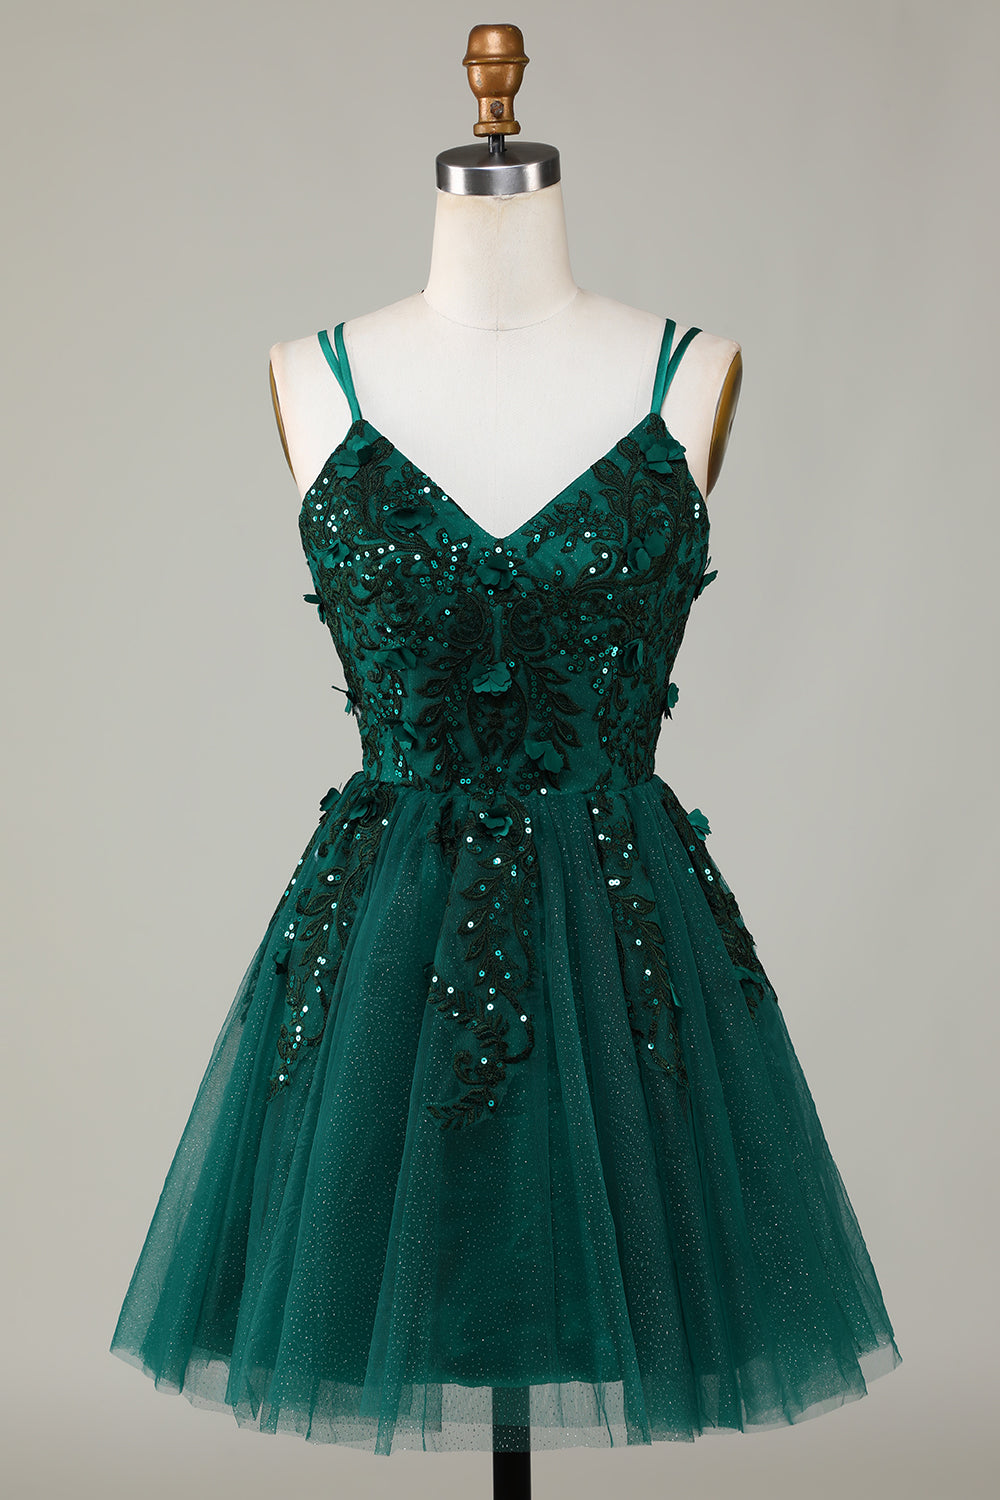 Prom Dress With Pocket, Stylish A Line Spaghetti Straps Dark Green Short Homecoming Dress with Appliques Beading